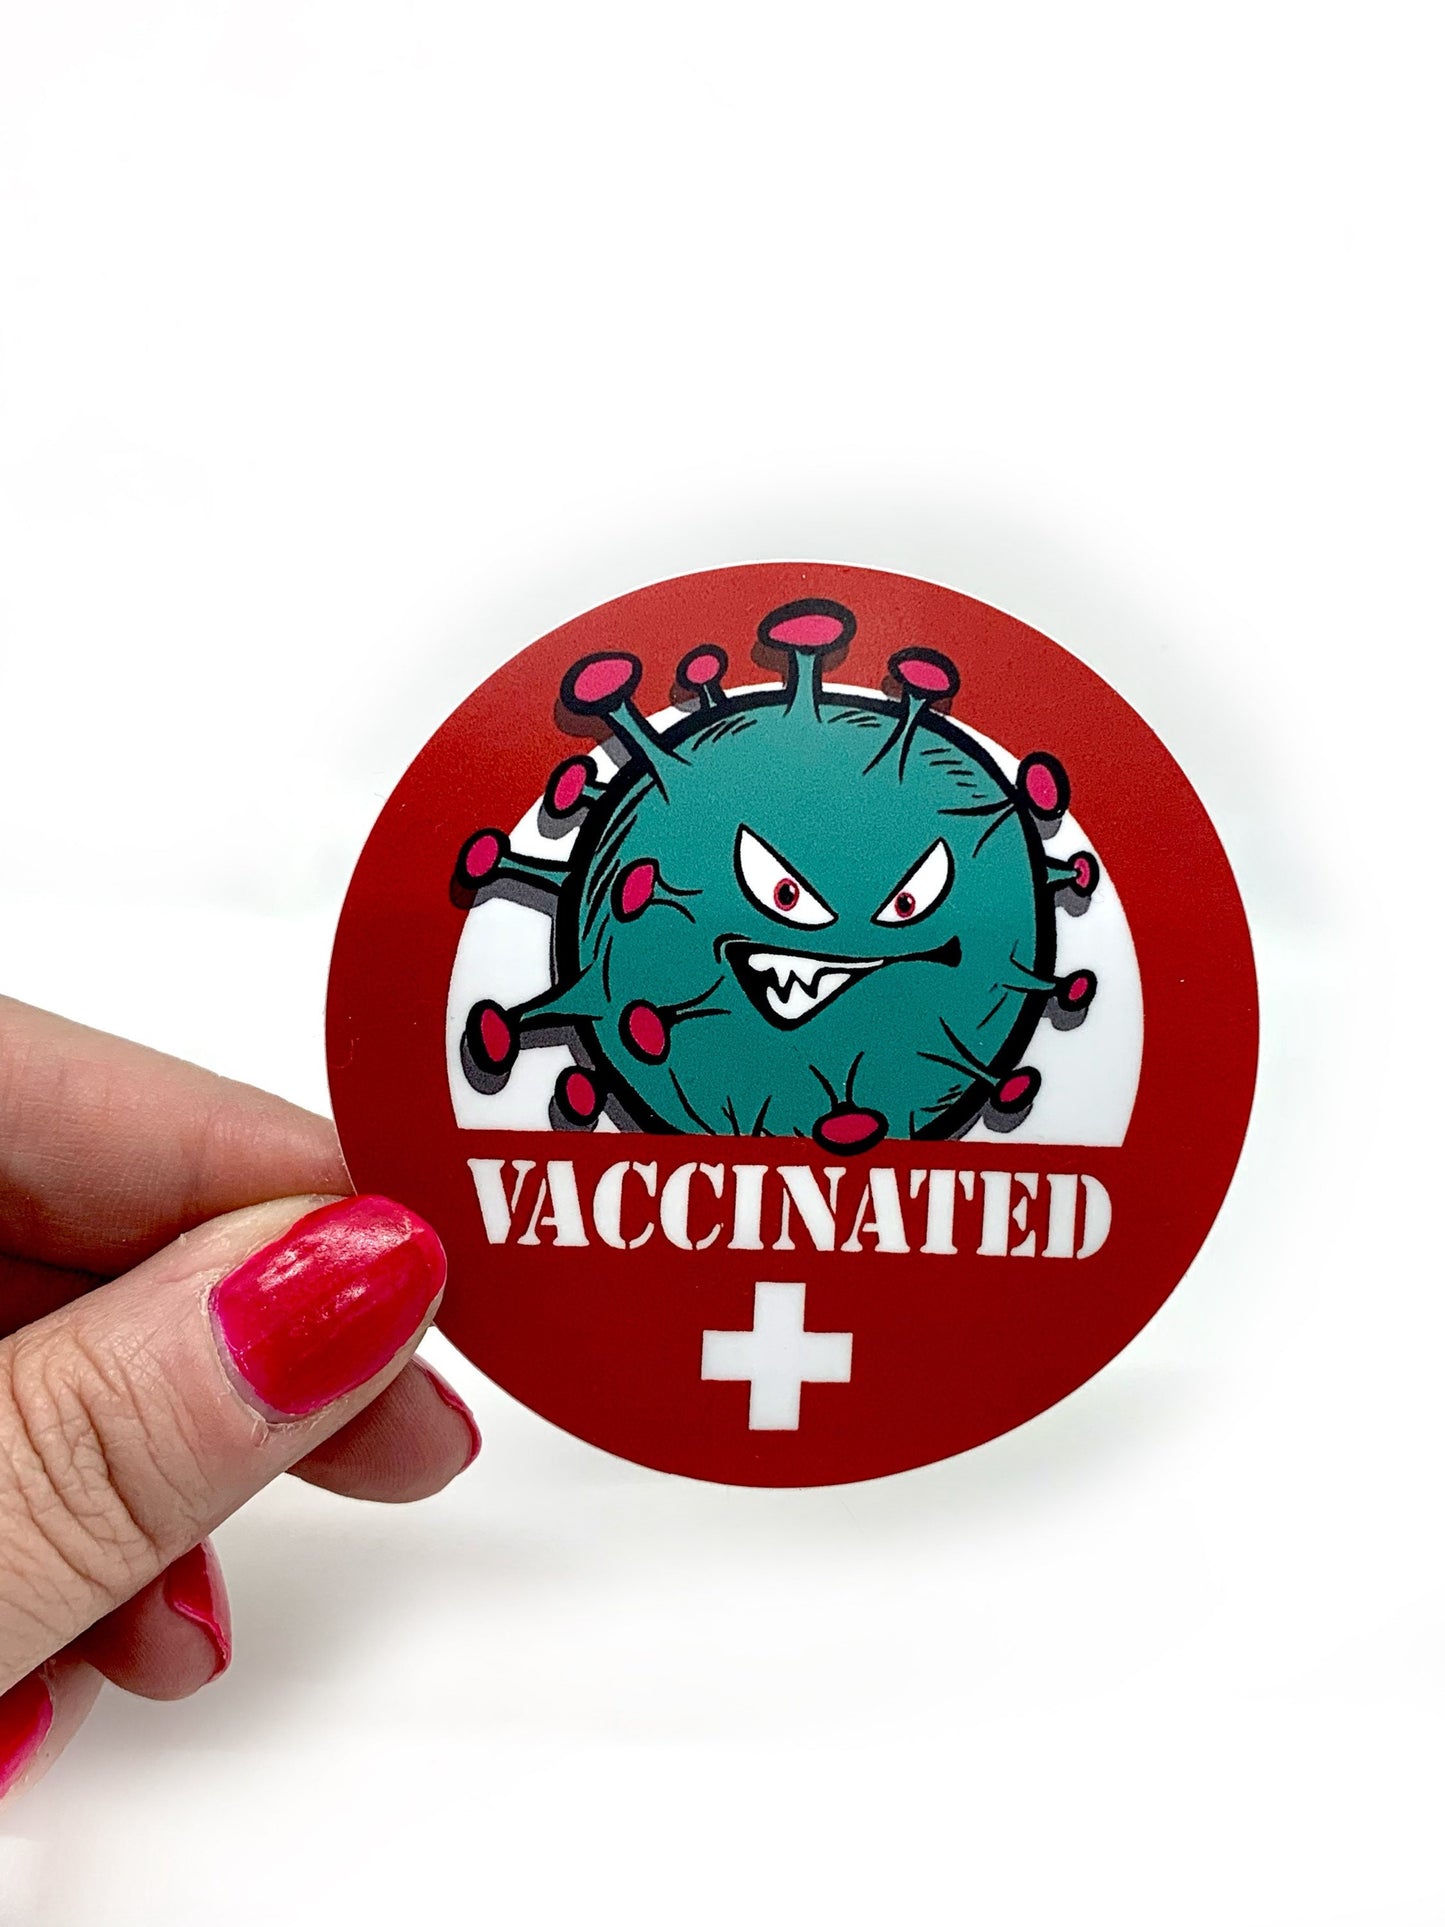 Vaccinated - Waterproof Sticker Decal